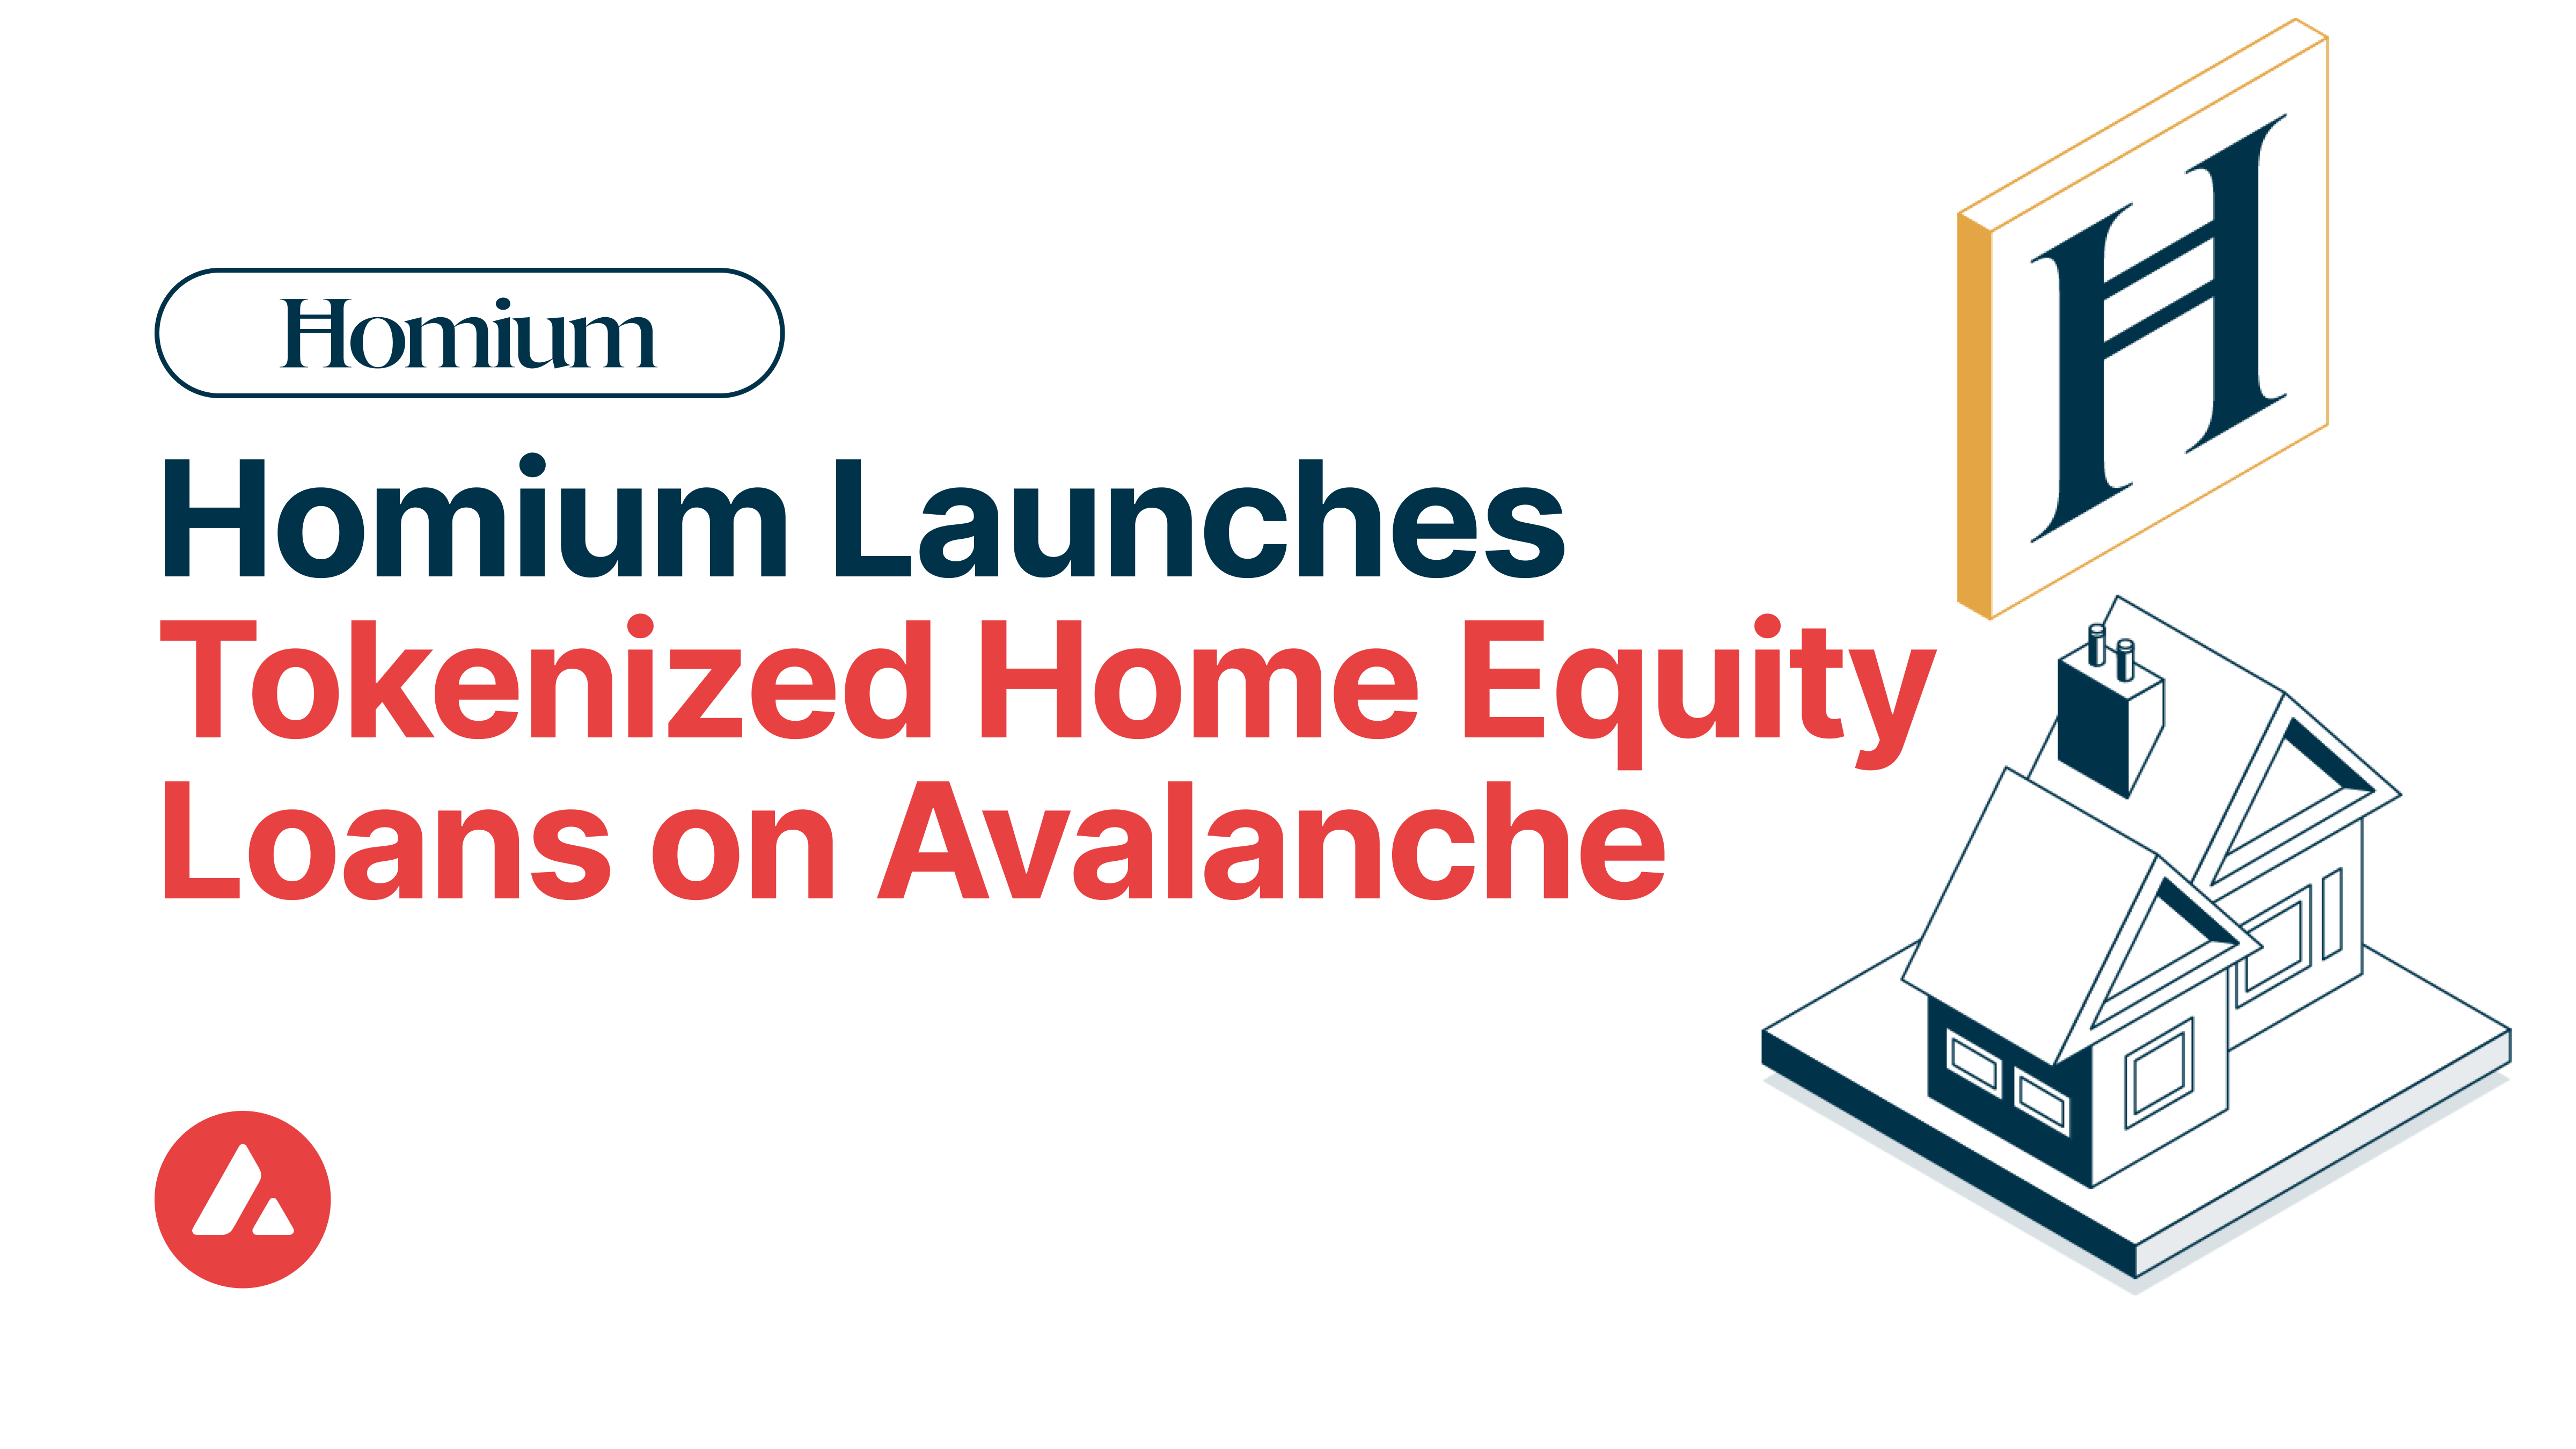 Homium launches tokenized home equity loans on Avalanche